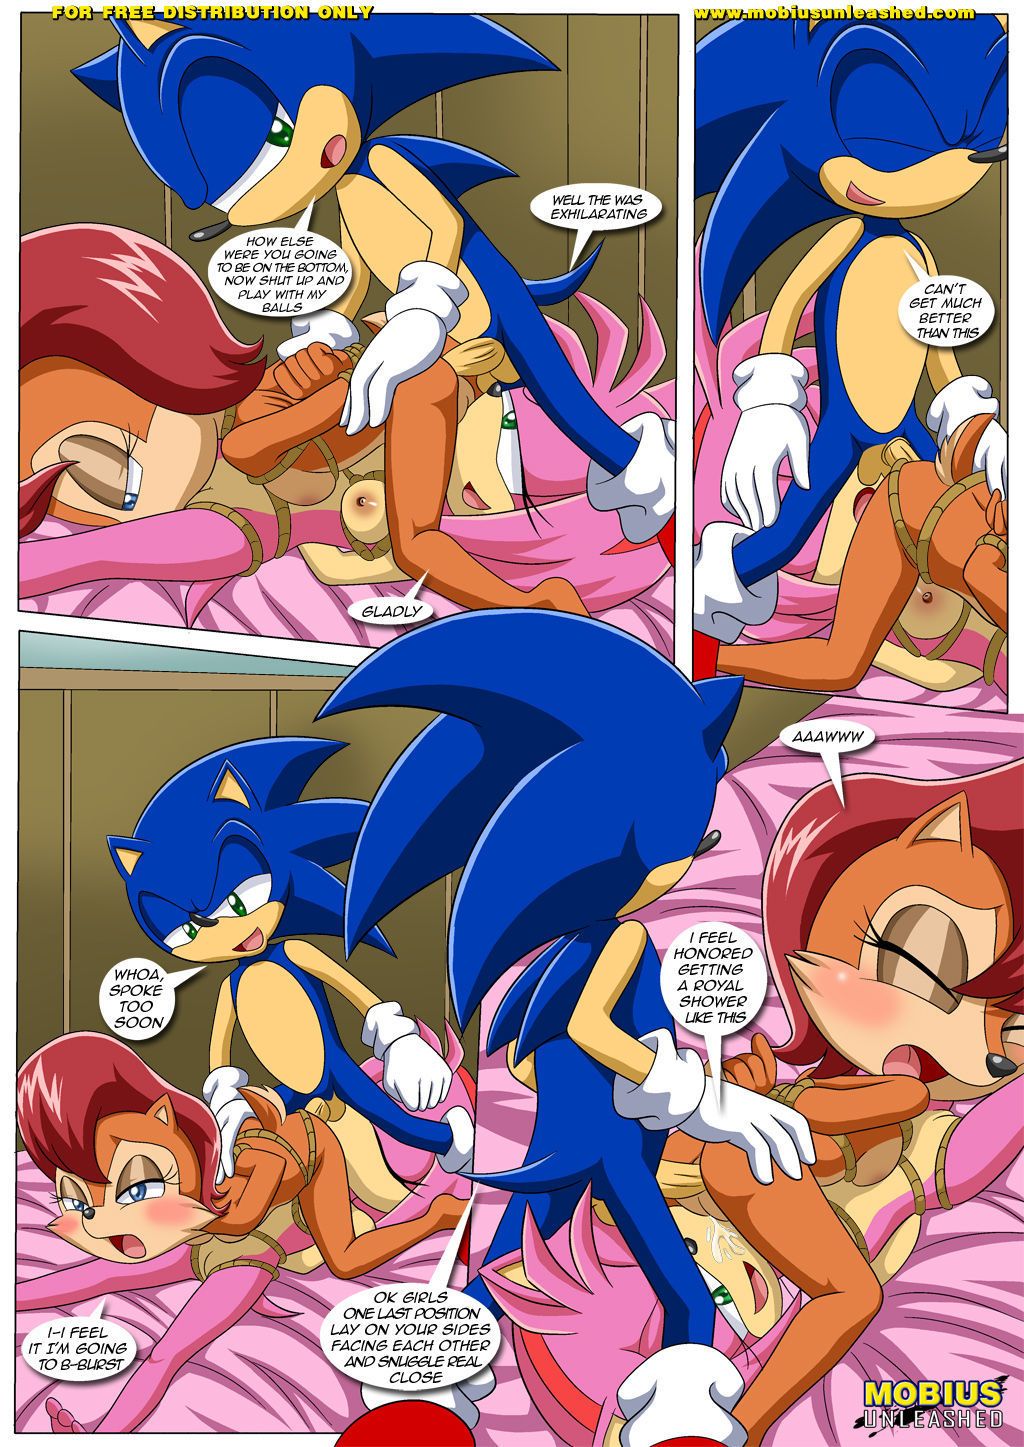 Palcomix (bbmbbf) The Heat of Passion (Sonic The Hedgehog) - part 2